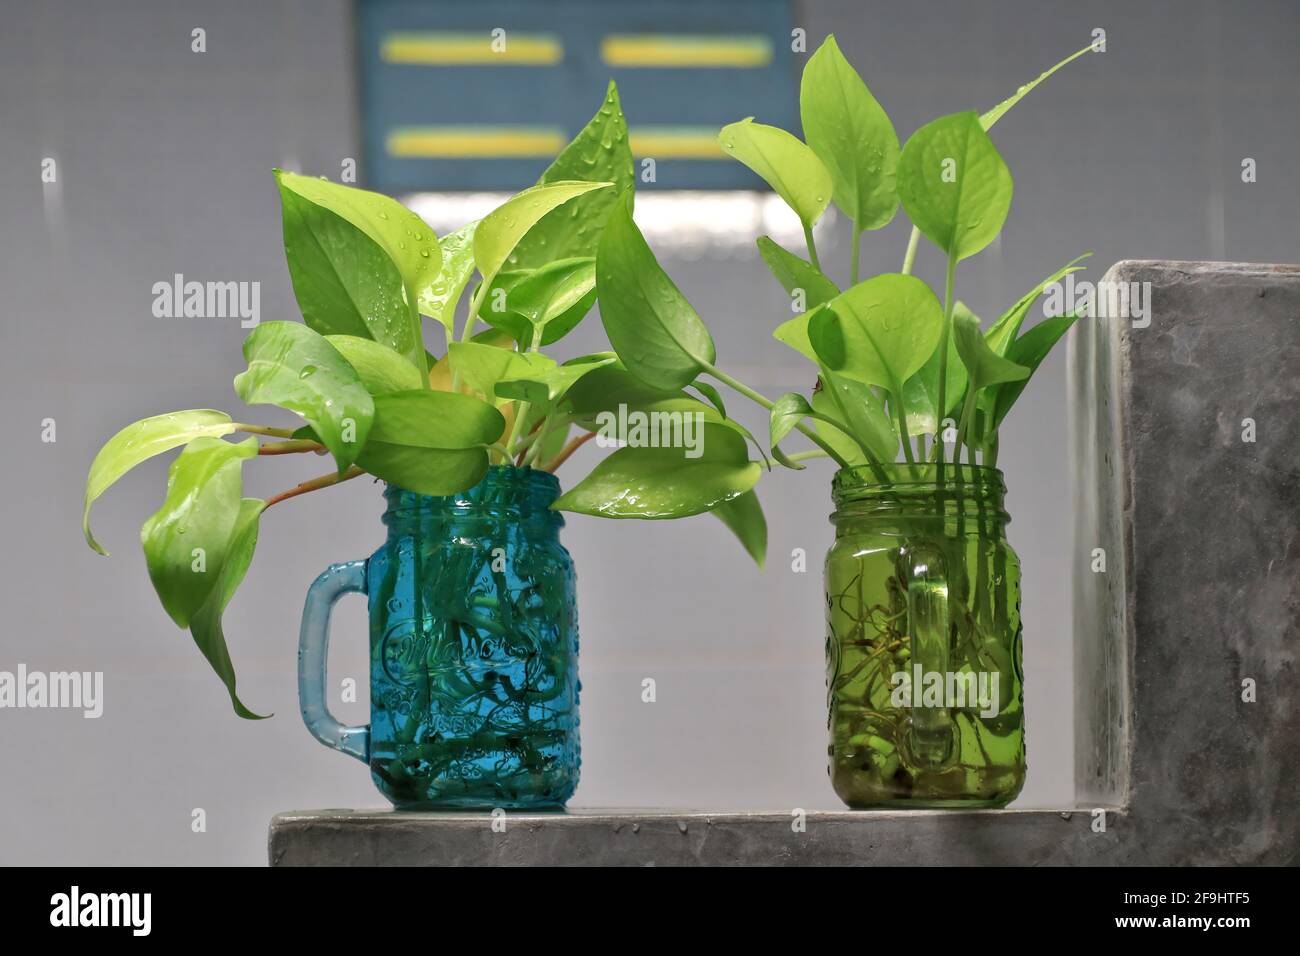 Golden pothos (Scindapsus aureus) add a touch of freshness to the bathroom. Planted in a clear, square glass. Stock Photo